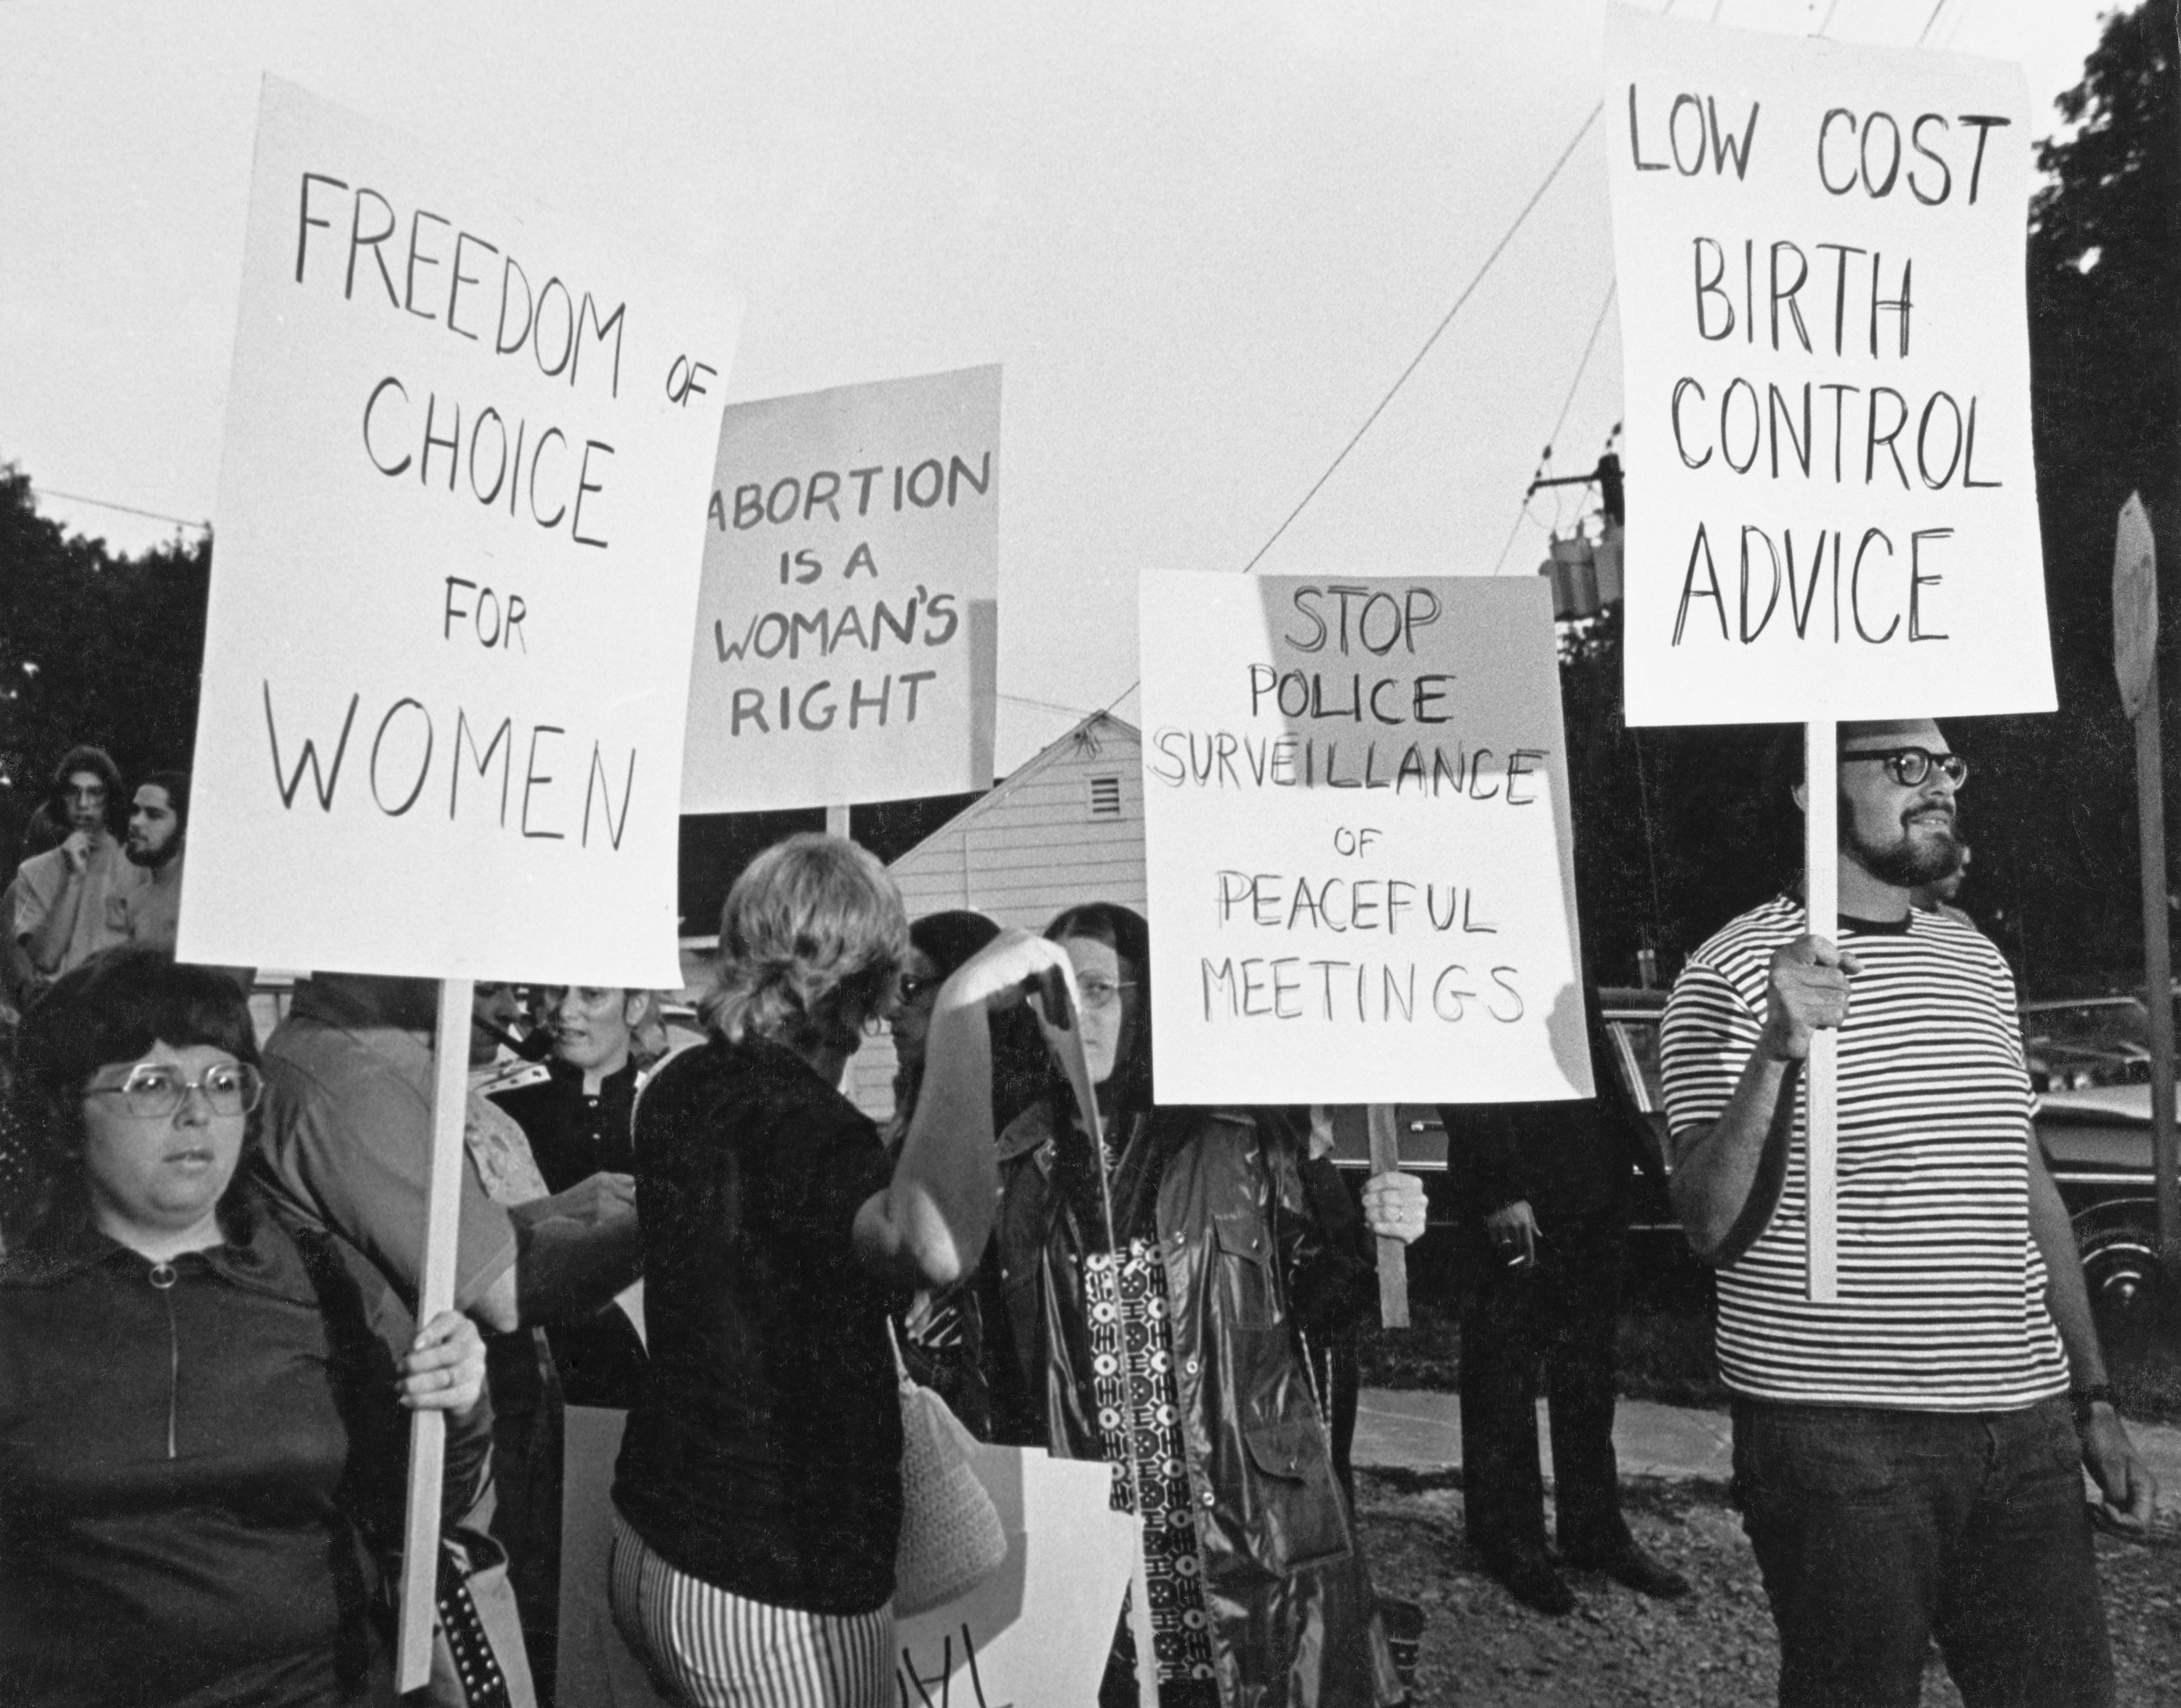 Protesters carry signs reading &quot;freedom of choice for women,&quot; &quot;low-cost birth control advice,&quot; &quot;stop police surveillance of peaceful meetings,&quot; and &quot;abortion is a woman&#x27;s right&quot;